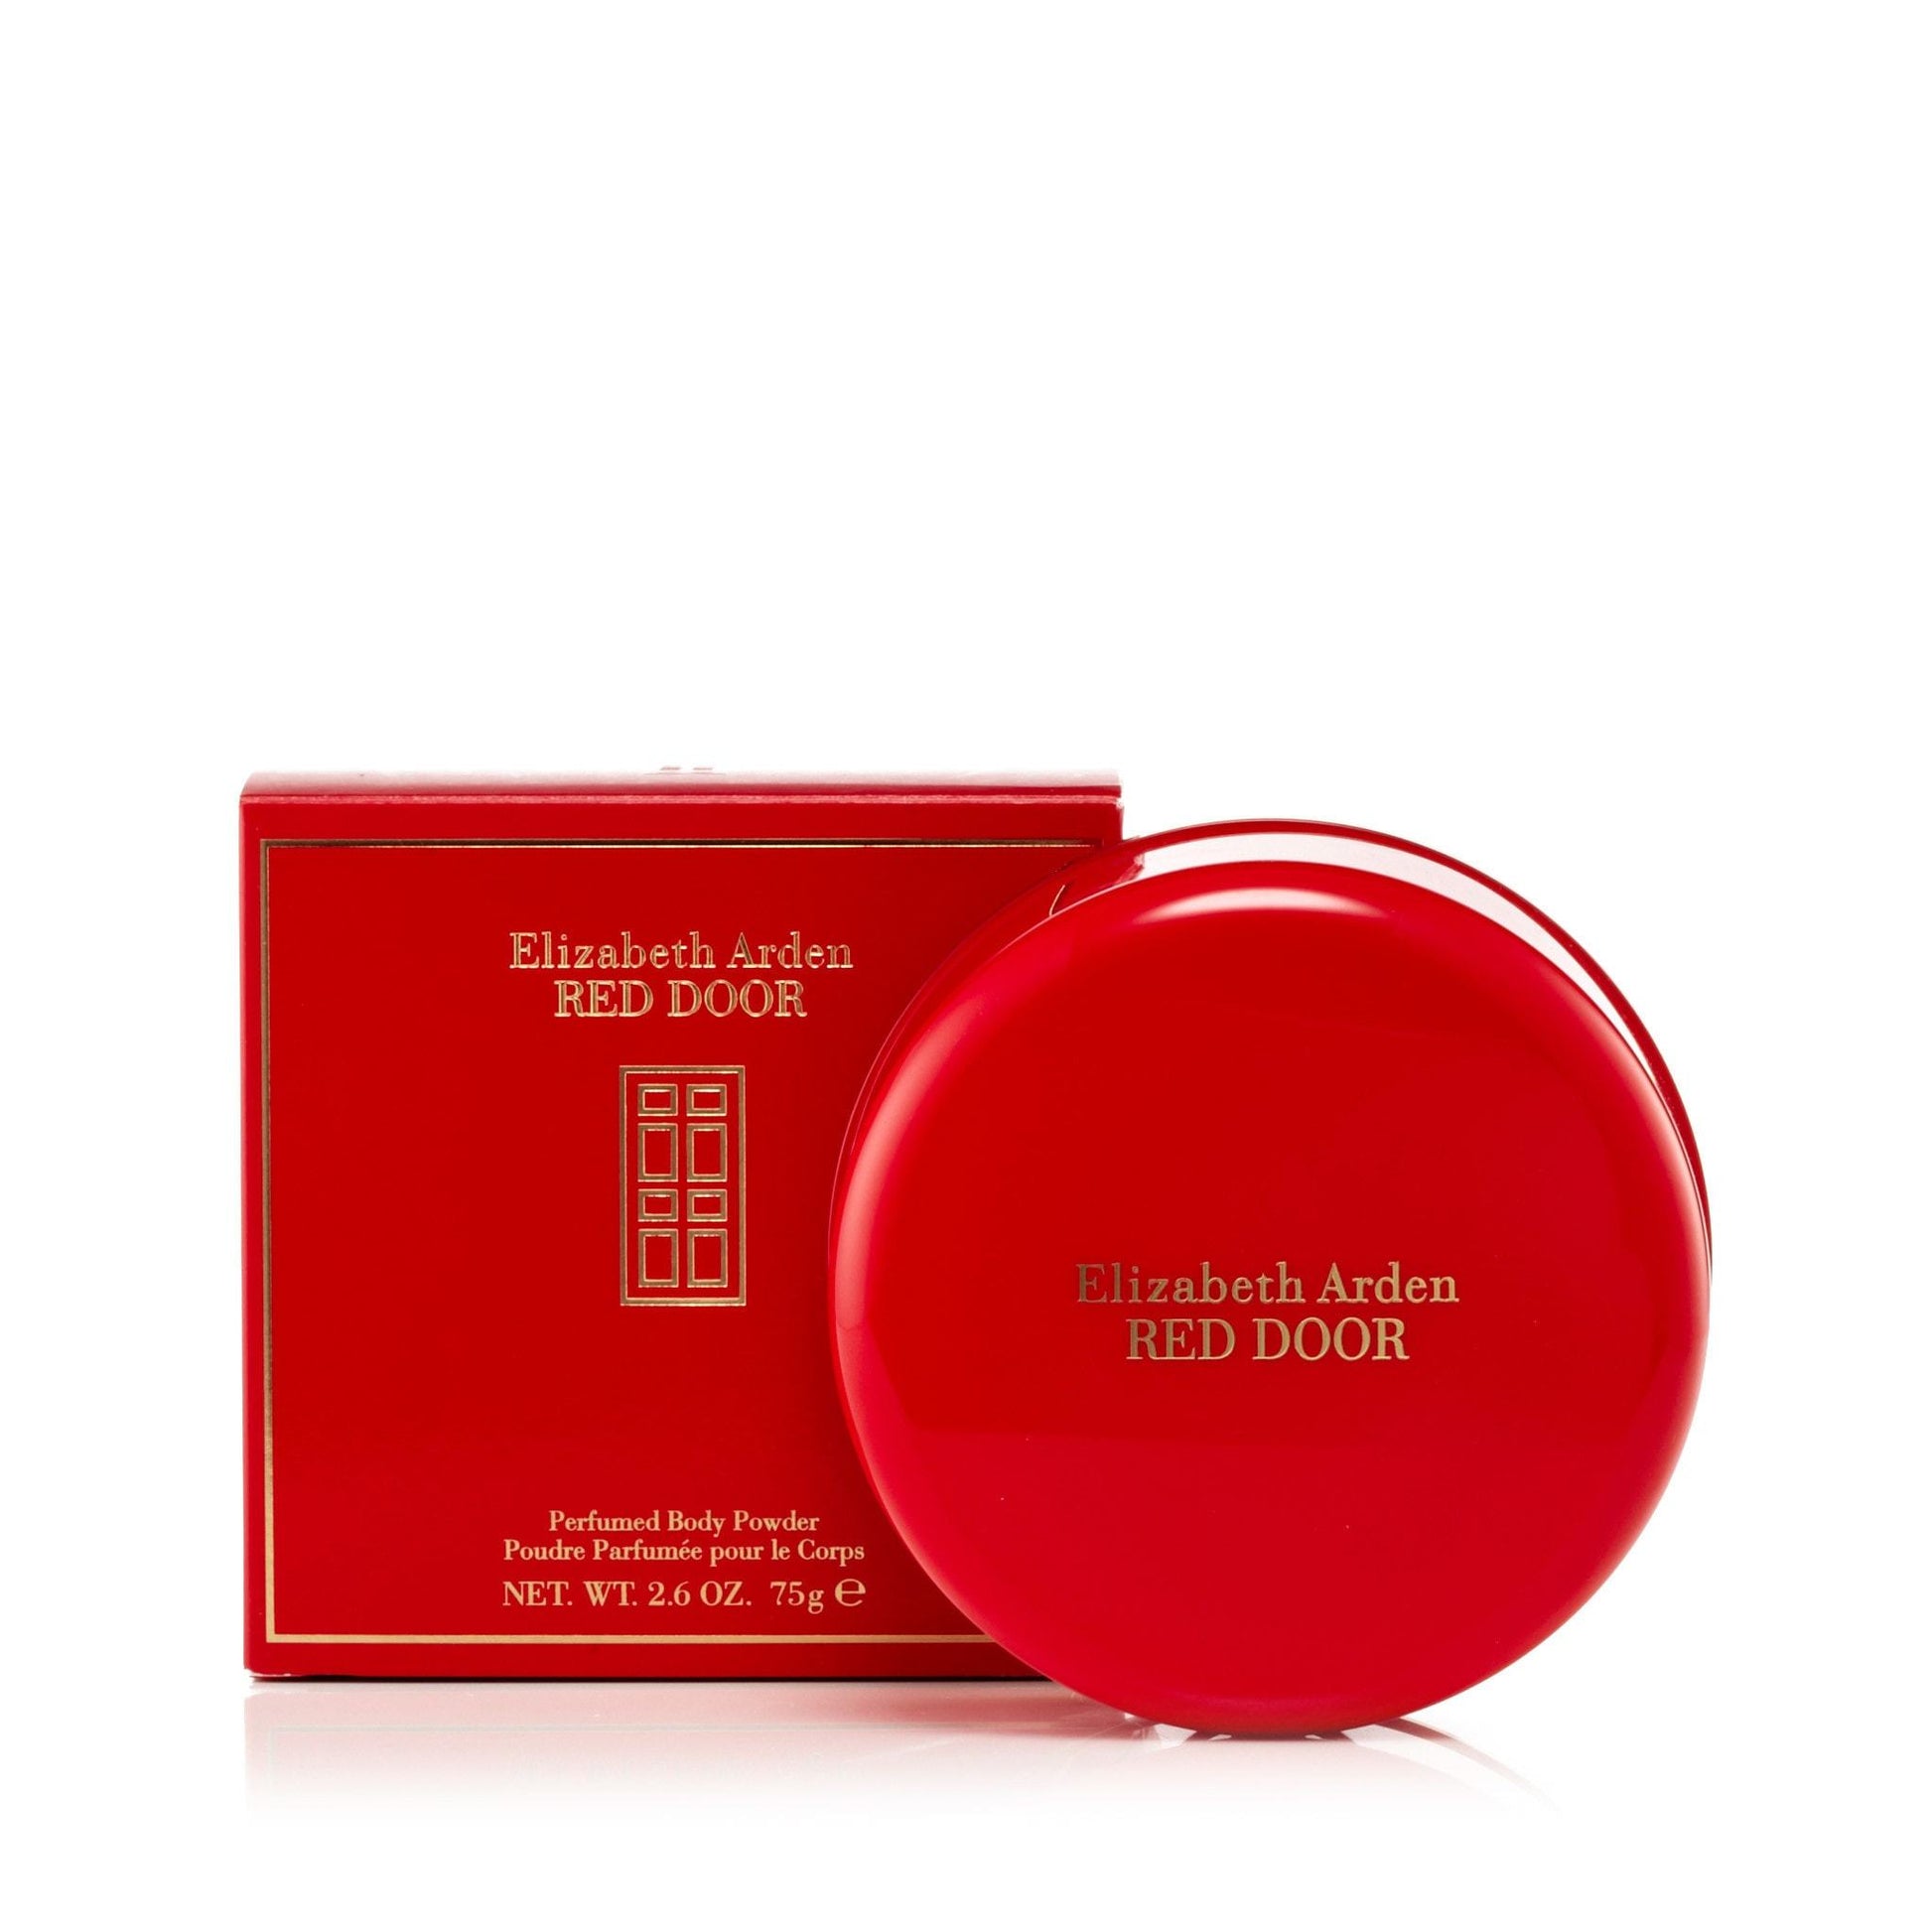 Red Door Dusting Powder for Women by Elizabeth Arden, Product image 1